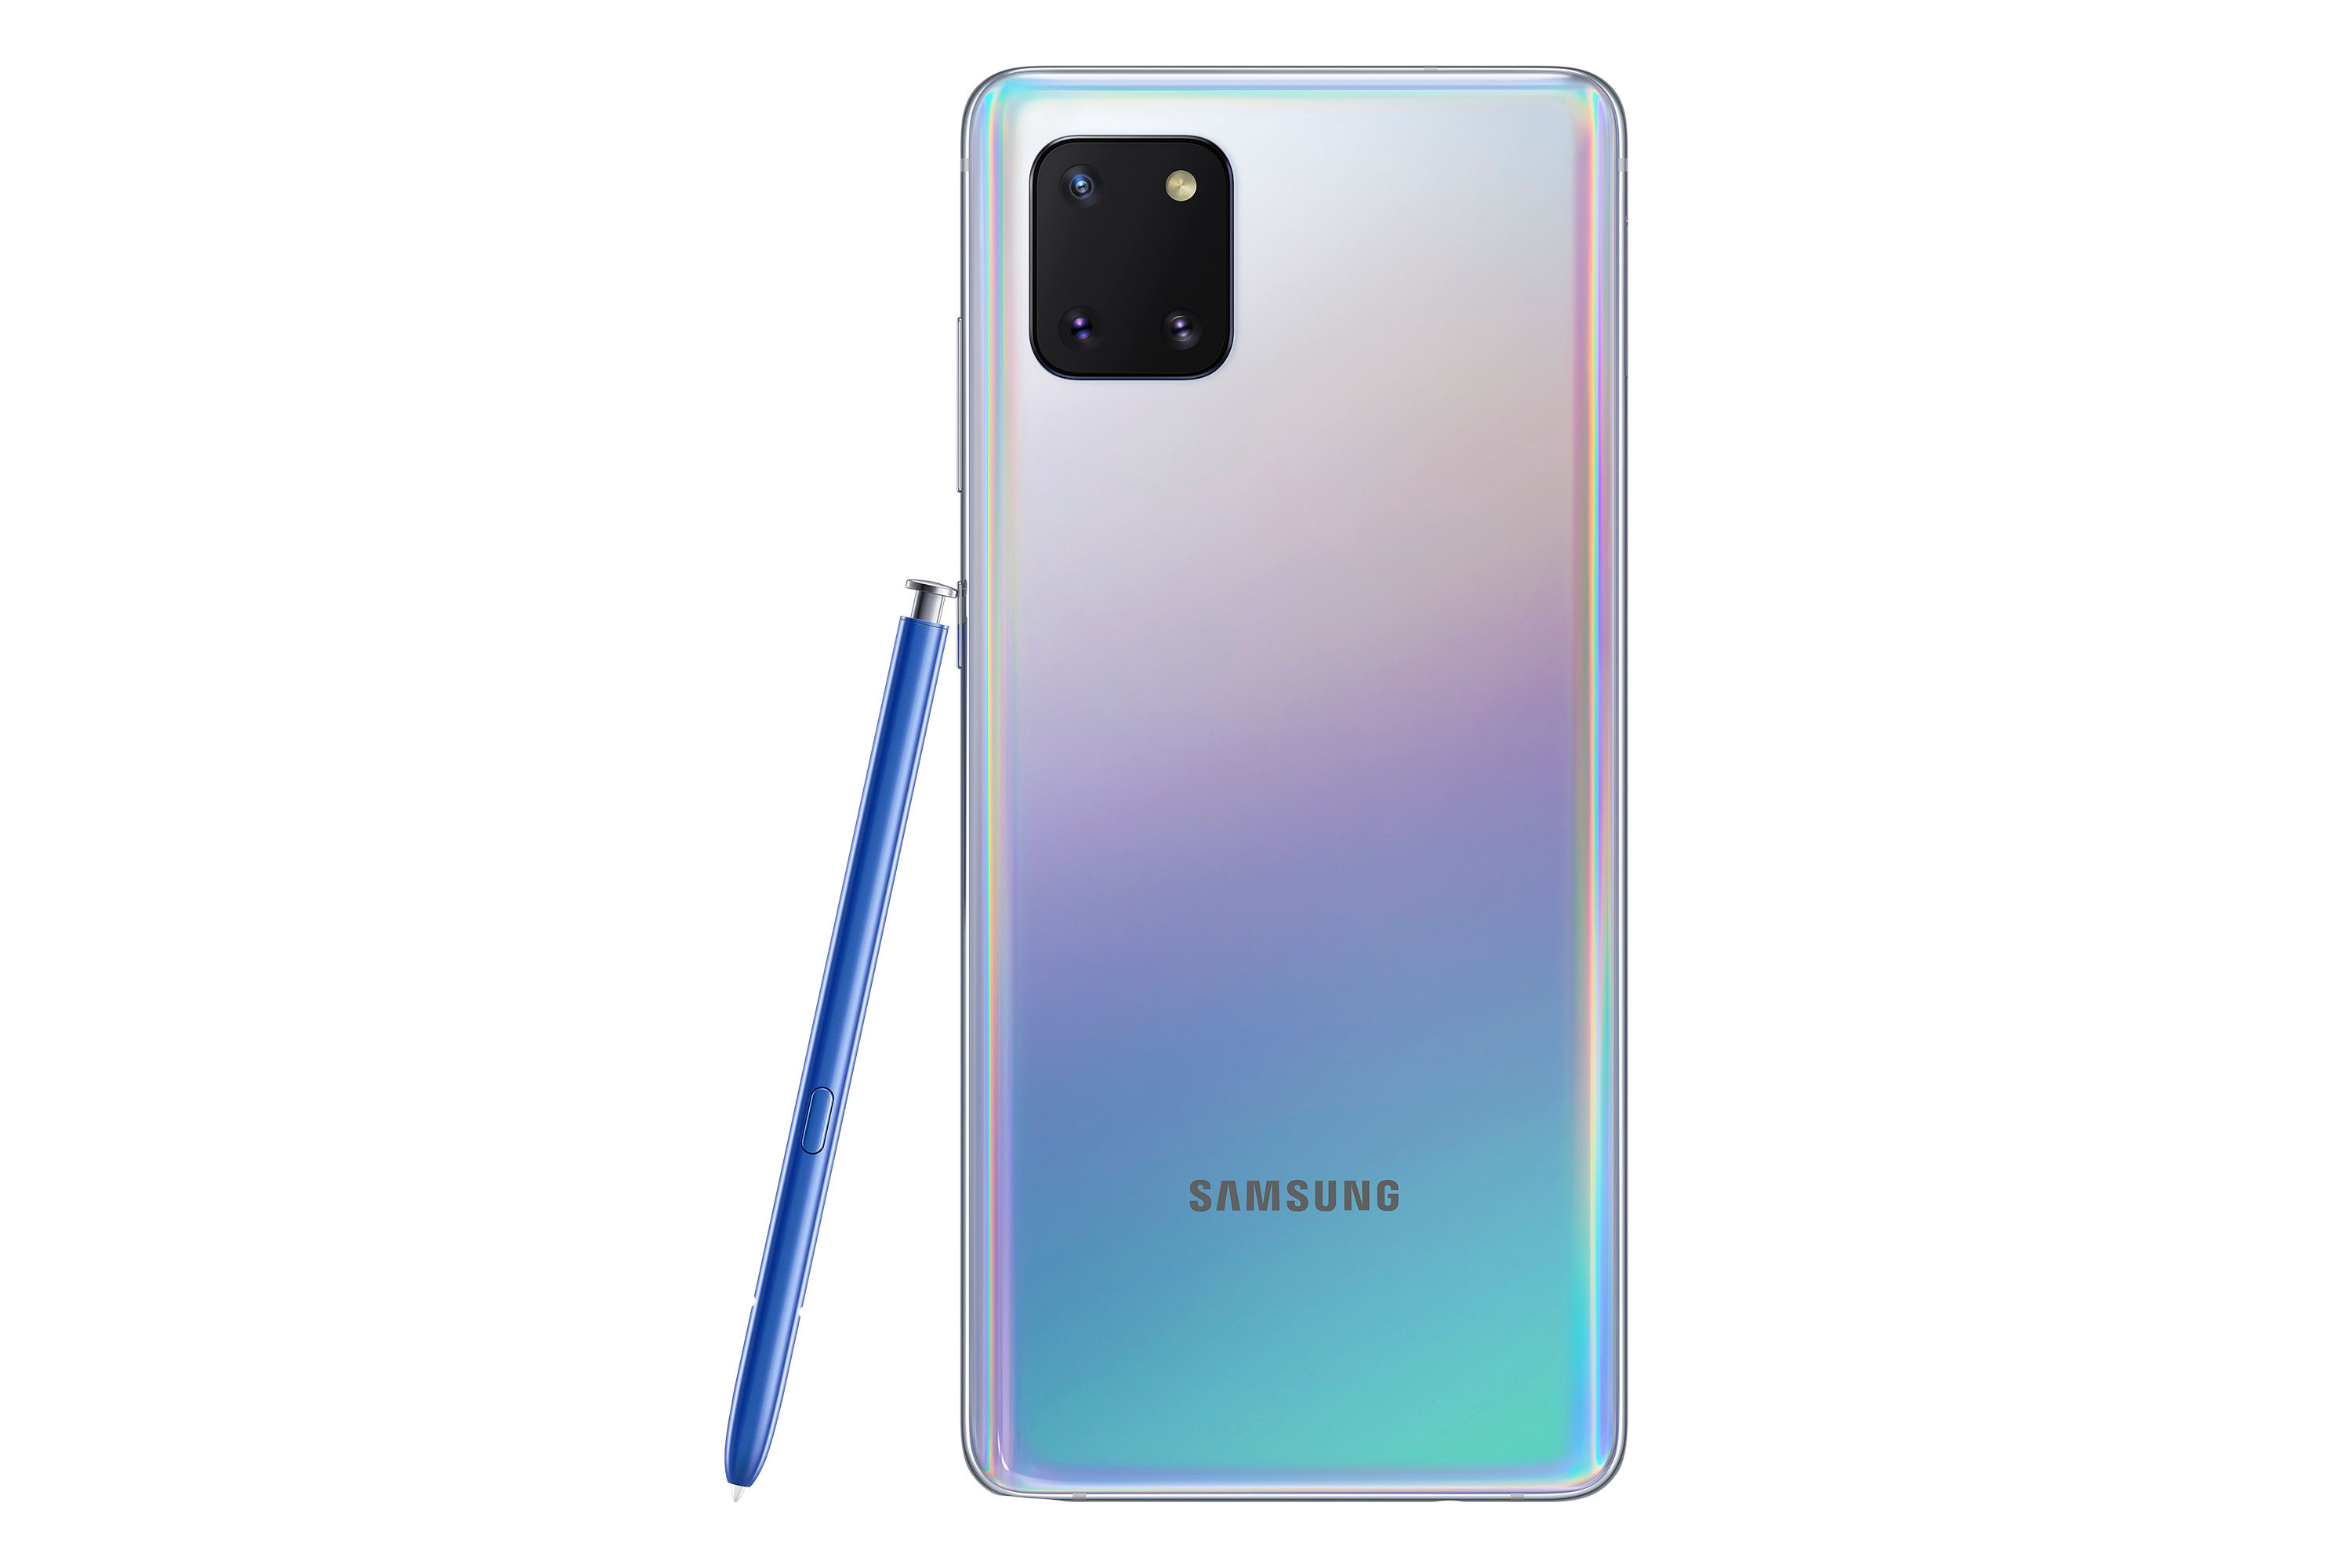 Samsung launches budget versions of the Galaxy S10 and Note10 smartphones